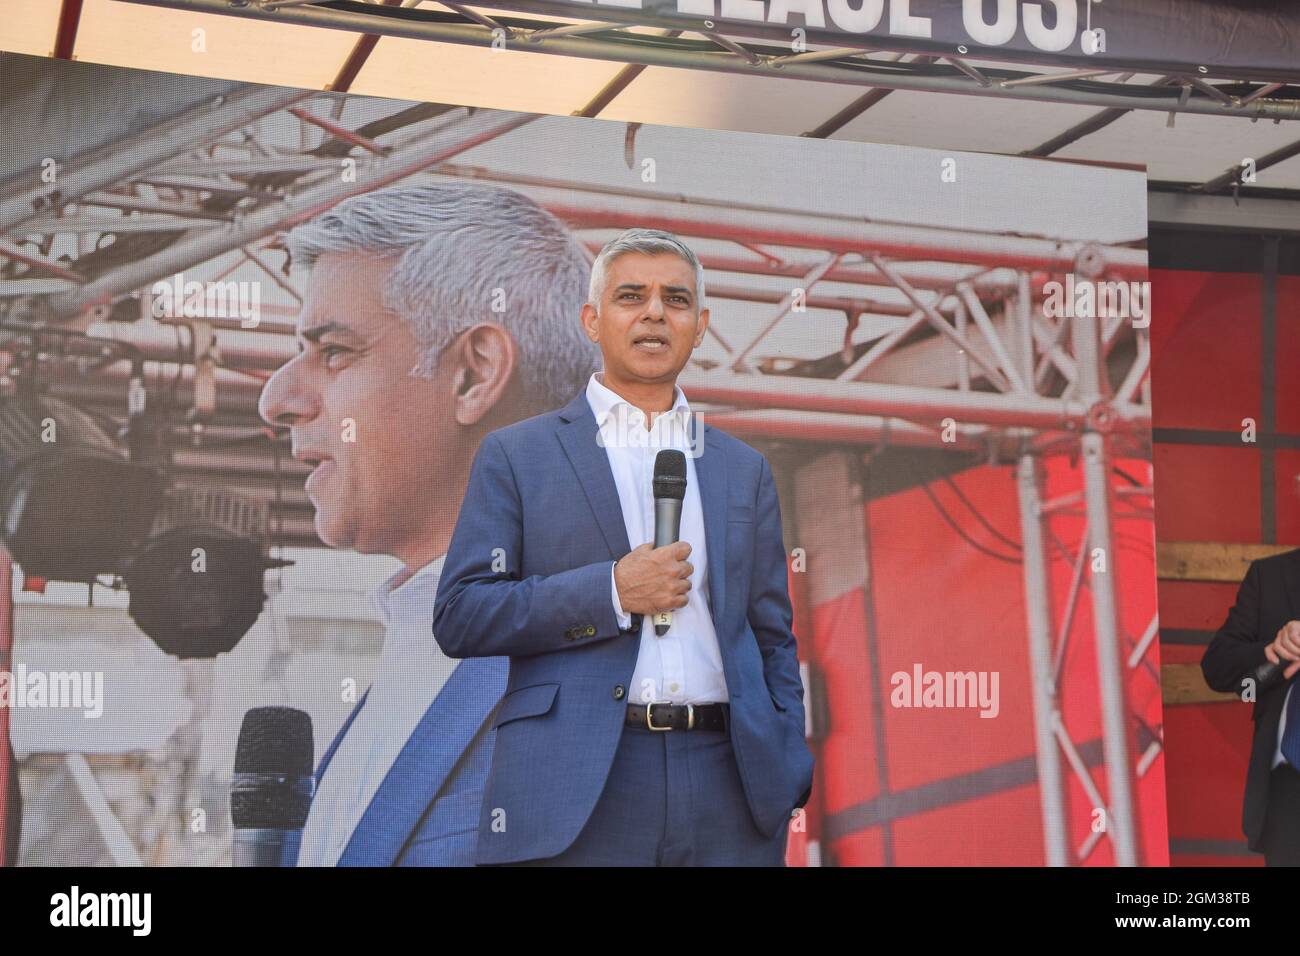 London, United Kingdom. 16th September 2021. Mayor of London Sadiq Khan speaking at the rally. Protesters gathered in Parliament Square to call on the government to address issues affecting leaseholders, including ending the cladding scandal and the outdated leasehold system. Credit: Vuk Valcic / Alamy Live News Stock Photo